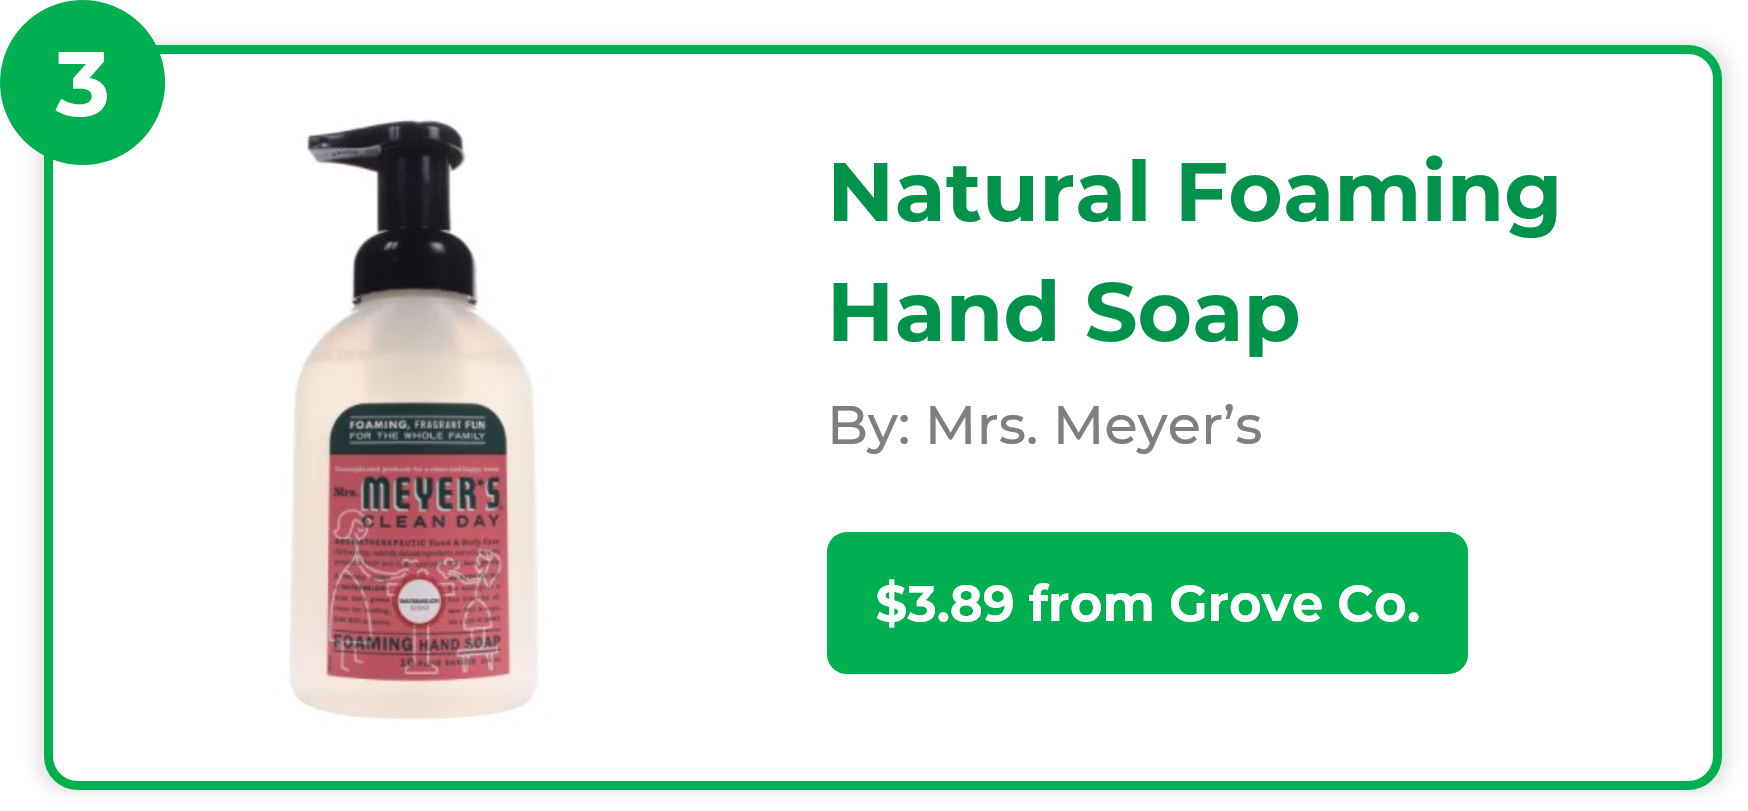 Natural Foaming Hand Soap - Mrs. Meyer’s